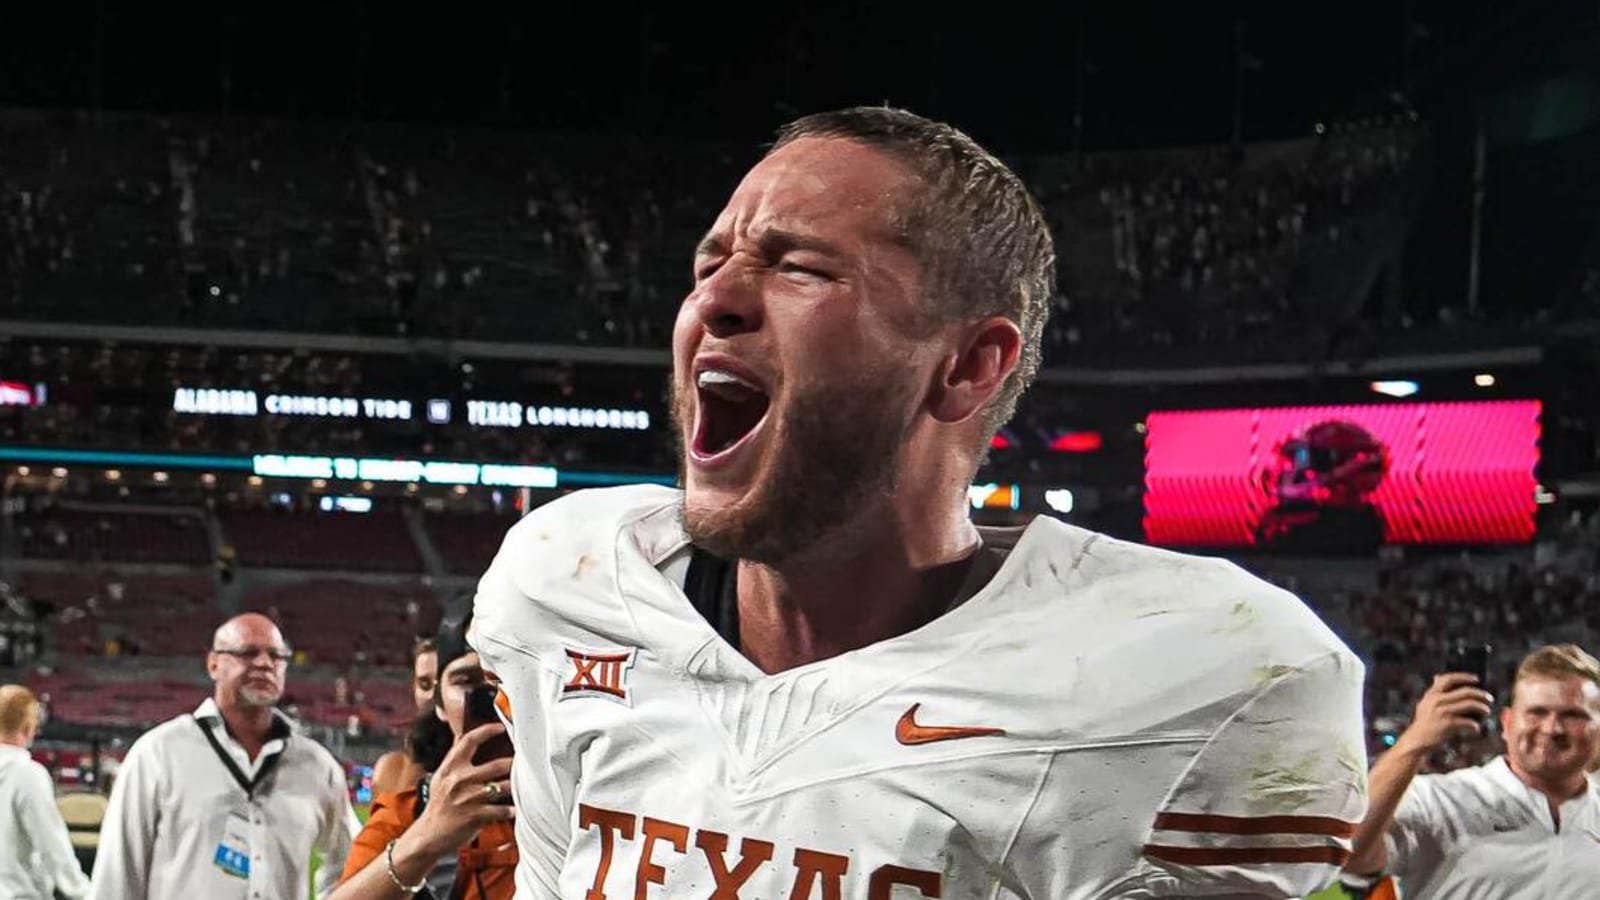 Is Texas back? Why the Longhorns can run the table